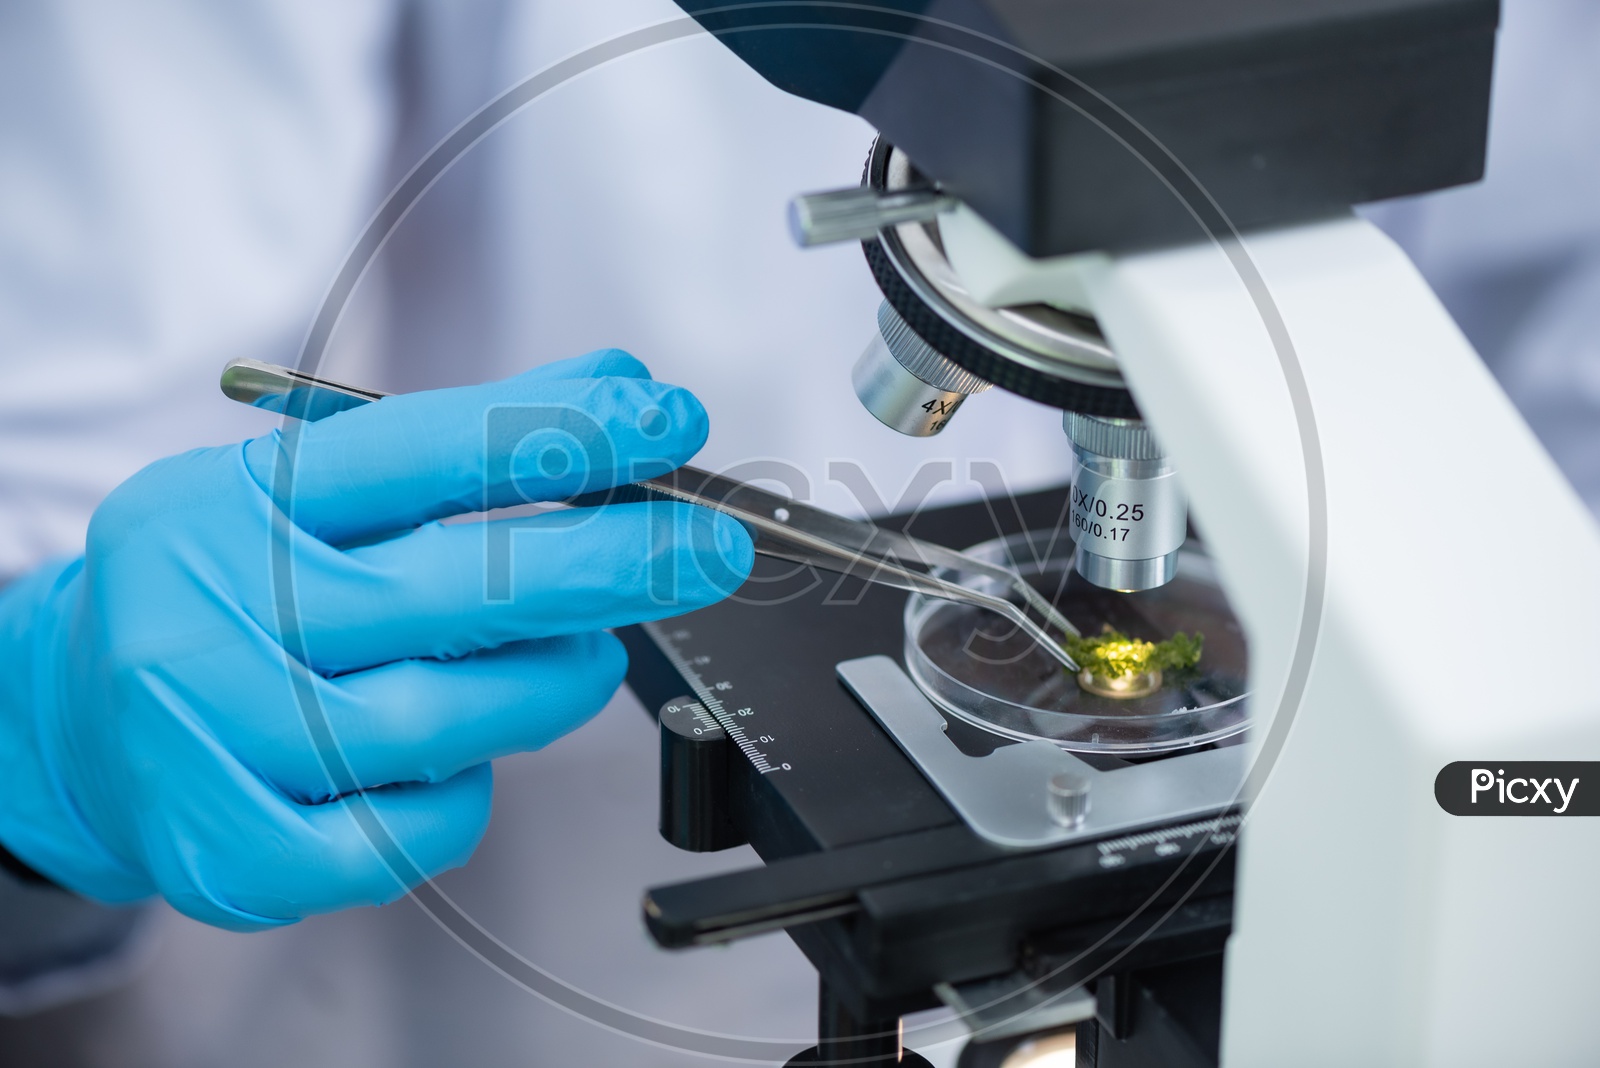 Asian Research Scientists using the Microscope in Modern Laboratory